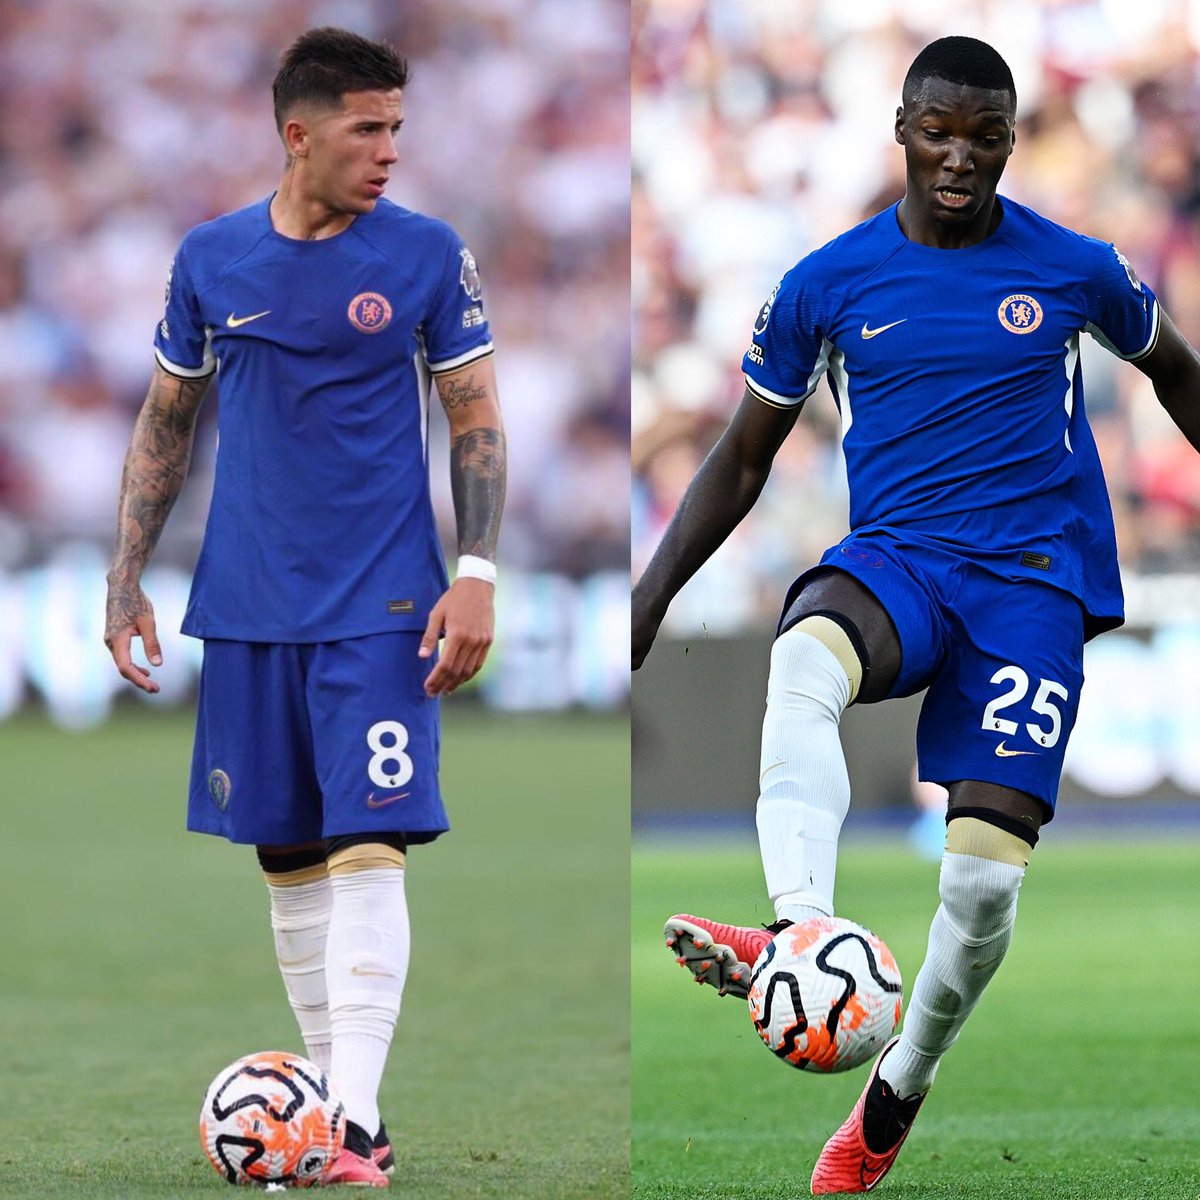 🚨🚨| Chelsea officials thought the Caicedo-Fernandez pivot could bring about an 'Era of Dominance' after they signed the pair for a combined £222m, but that has not been the case on the pitch. 

[@standardsport]